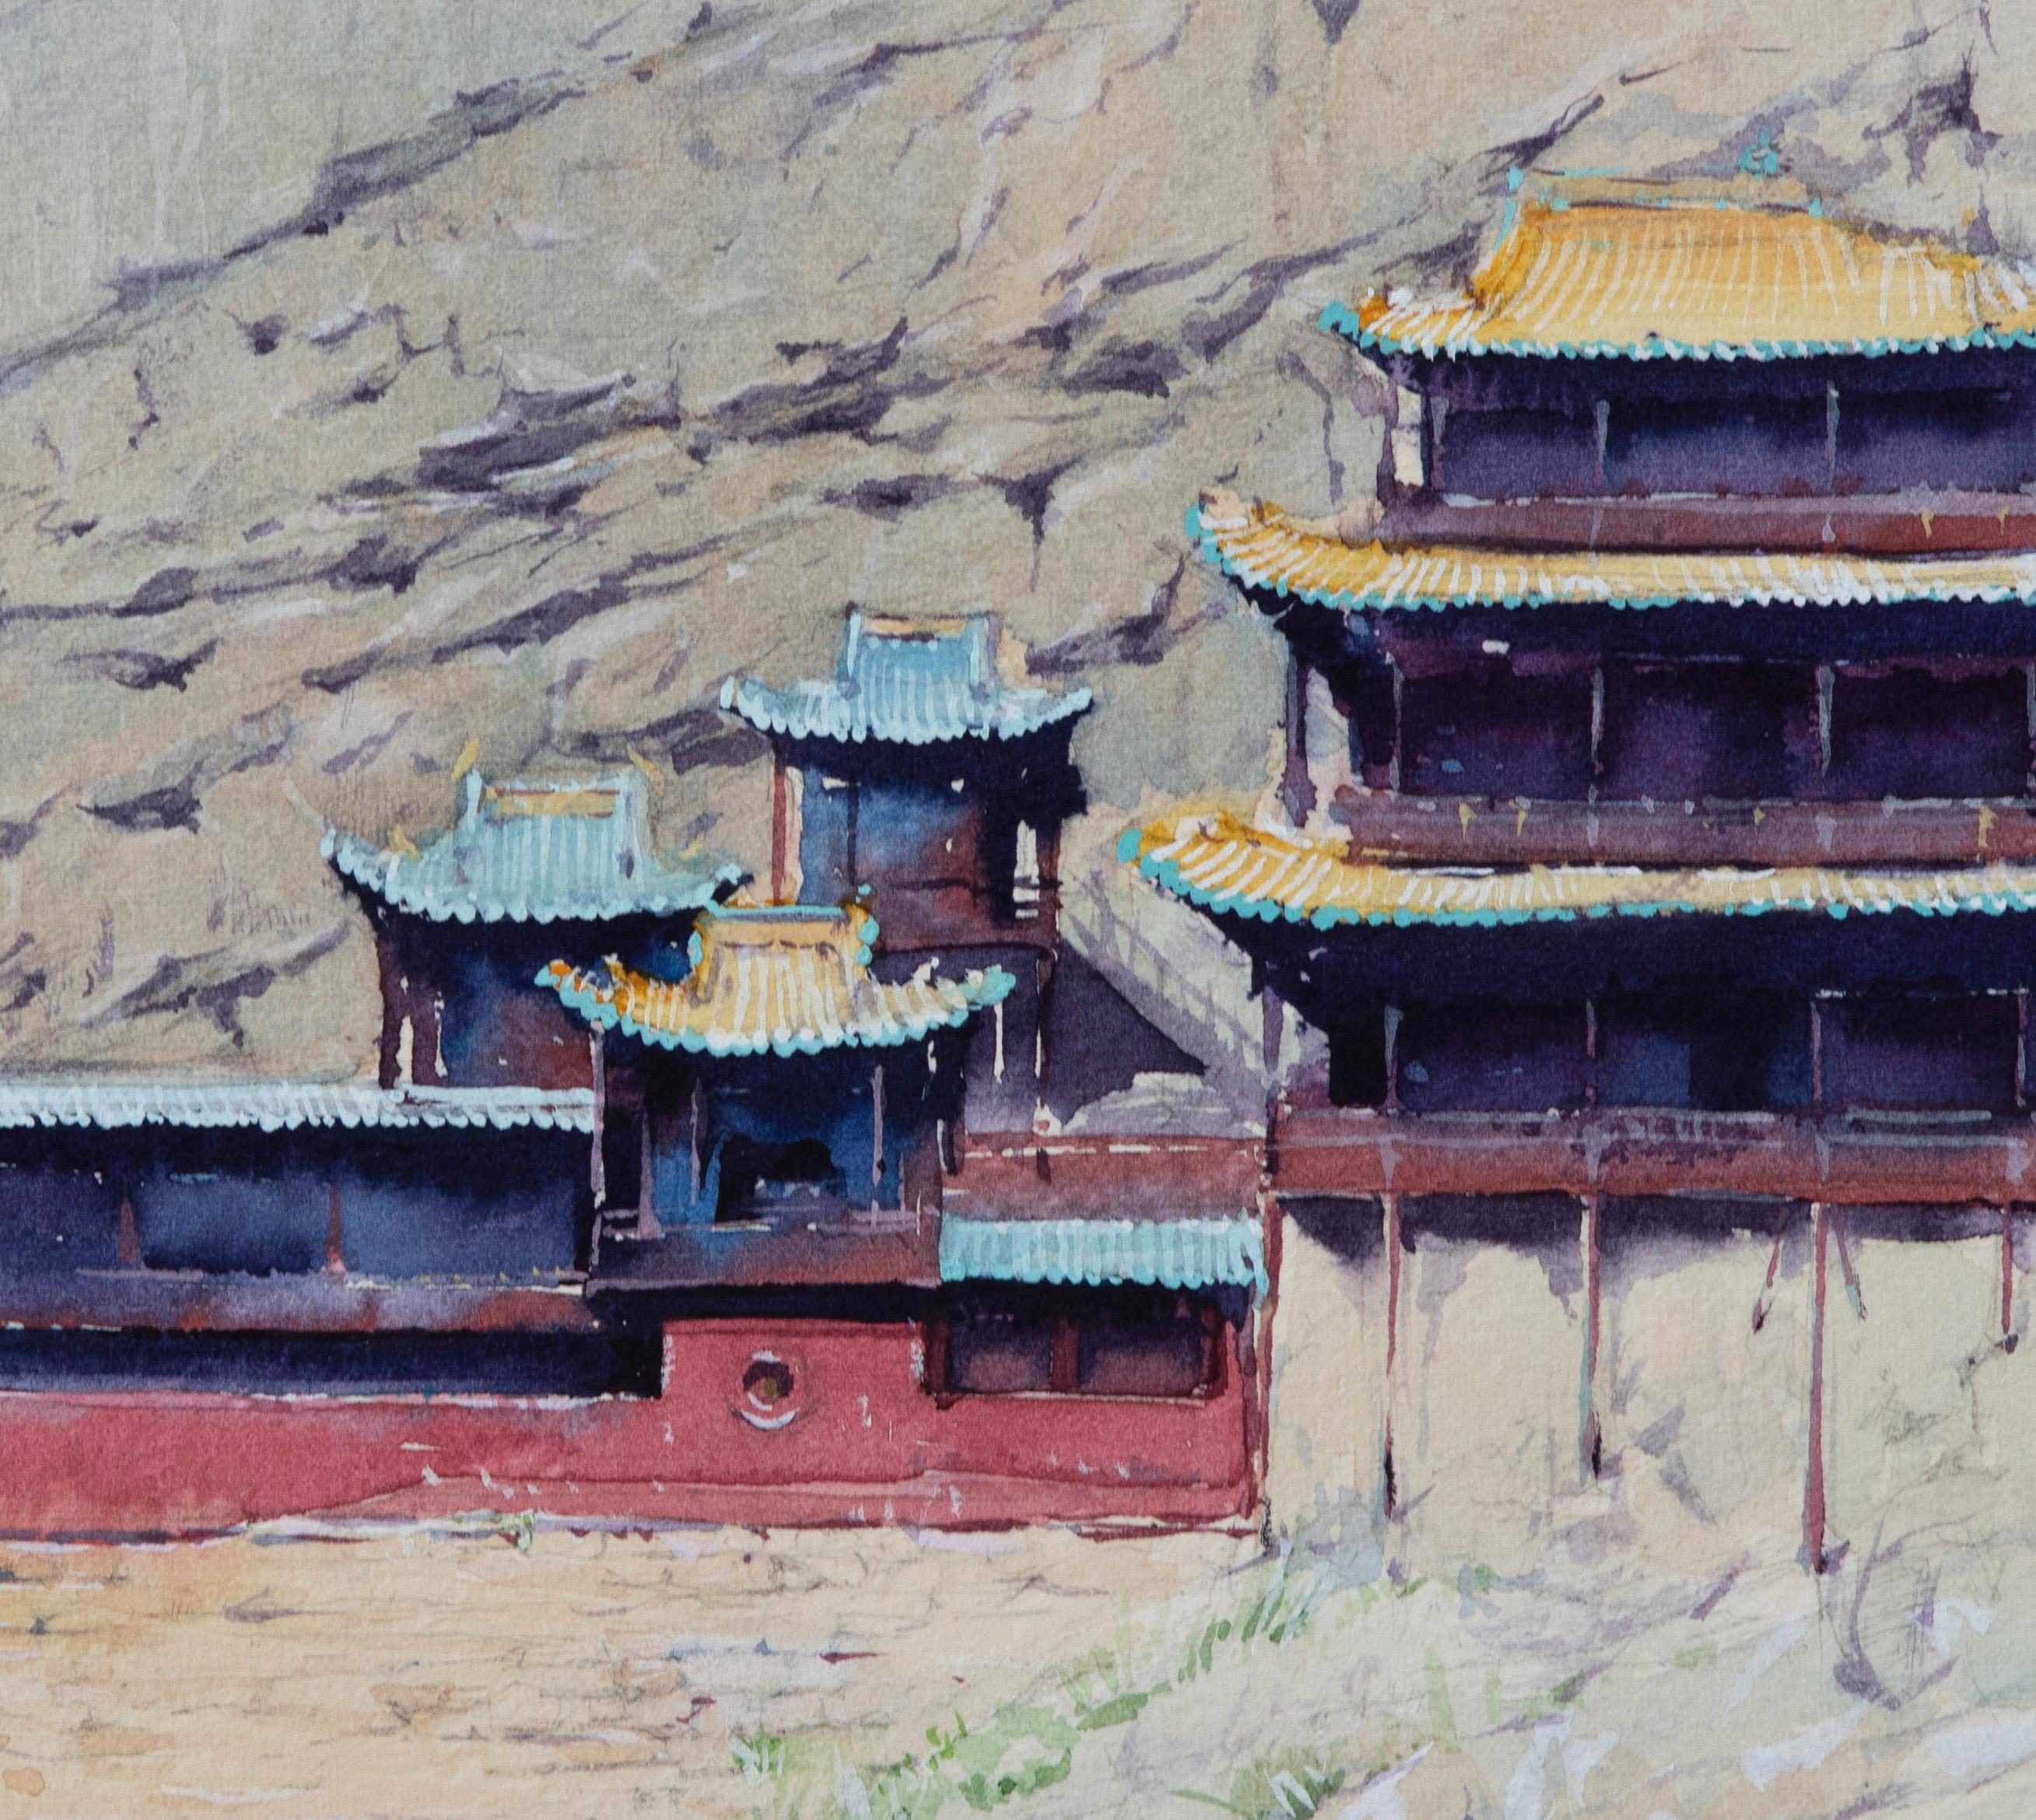 <p>Artist Comments<br>Artist Siyuan Ma presents an impressionist depiction of the Hanging Temple, a famous cultural landmark in China. Its Chinese name takes the character 